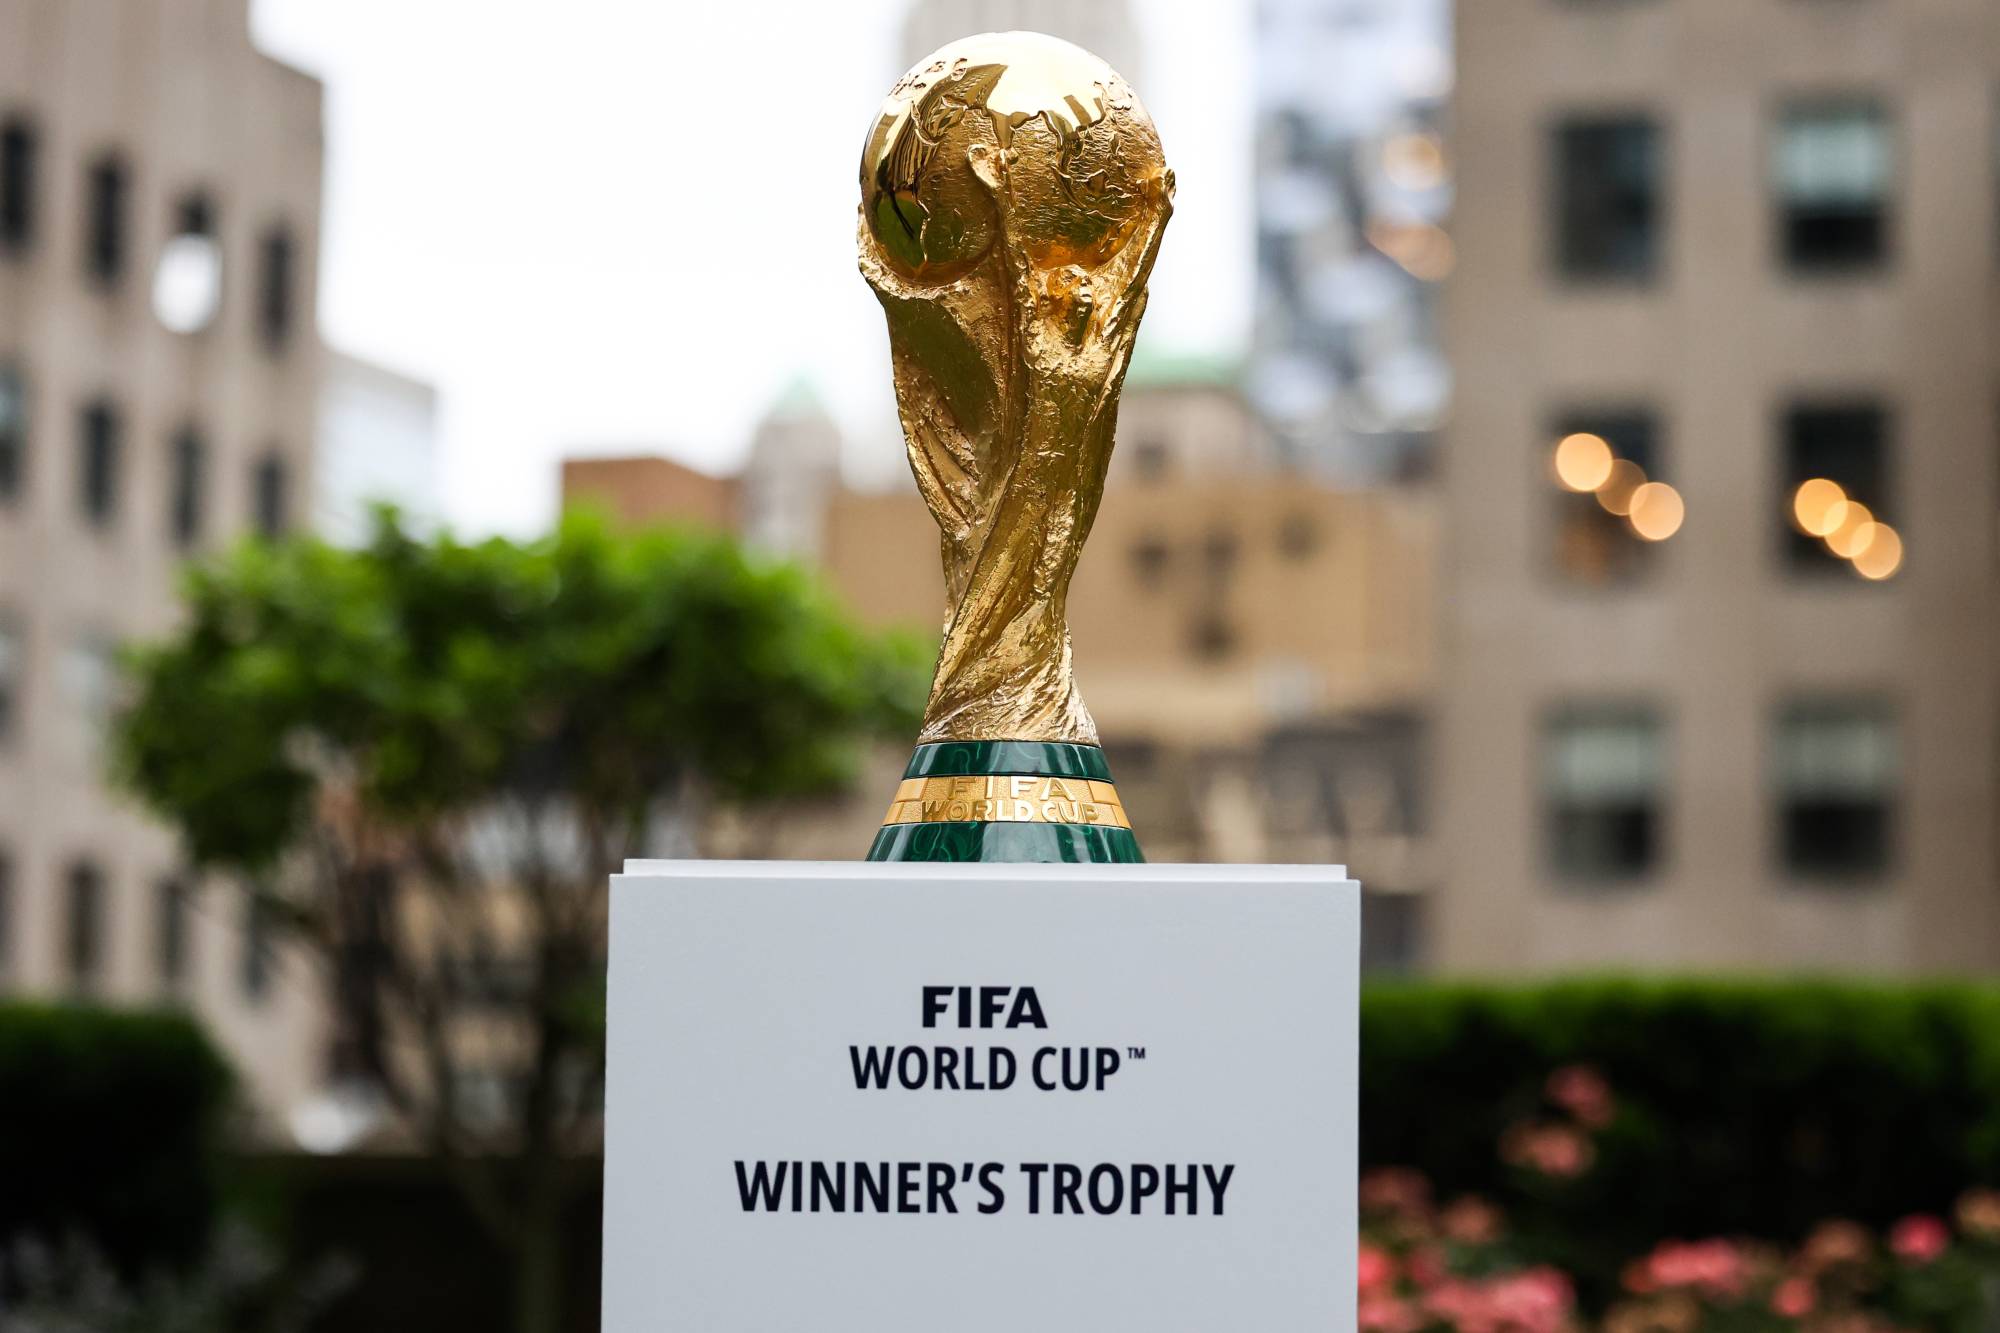 Deepika Padukone to unveil the FIFA World Cup 2022 trophy